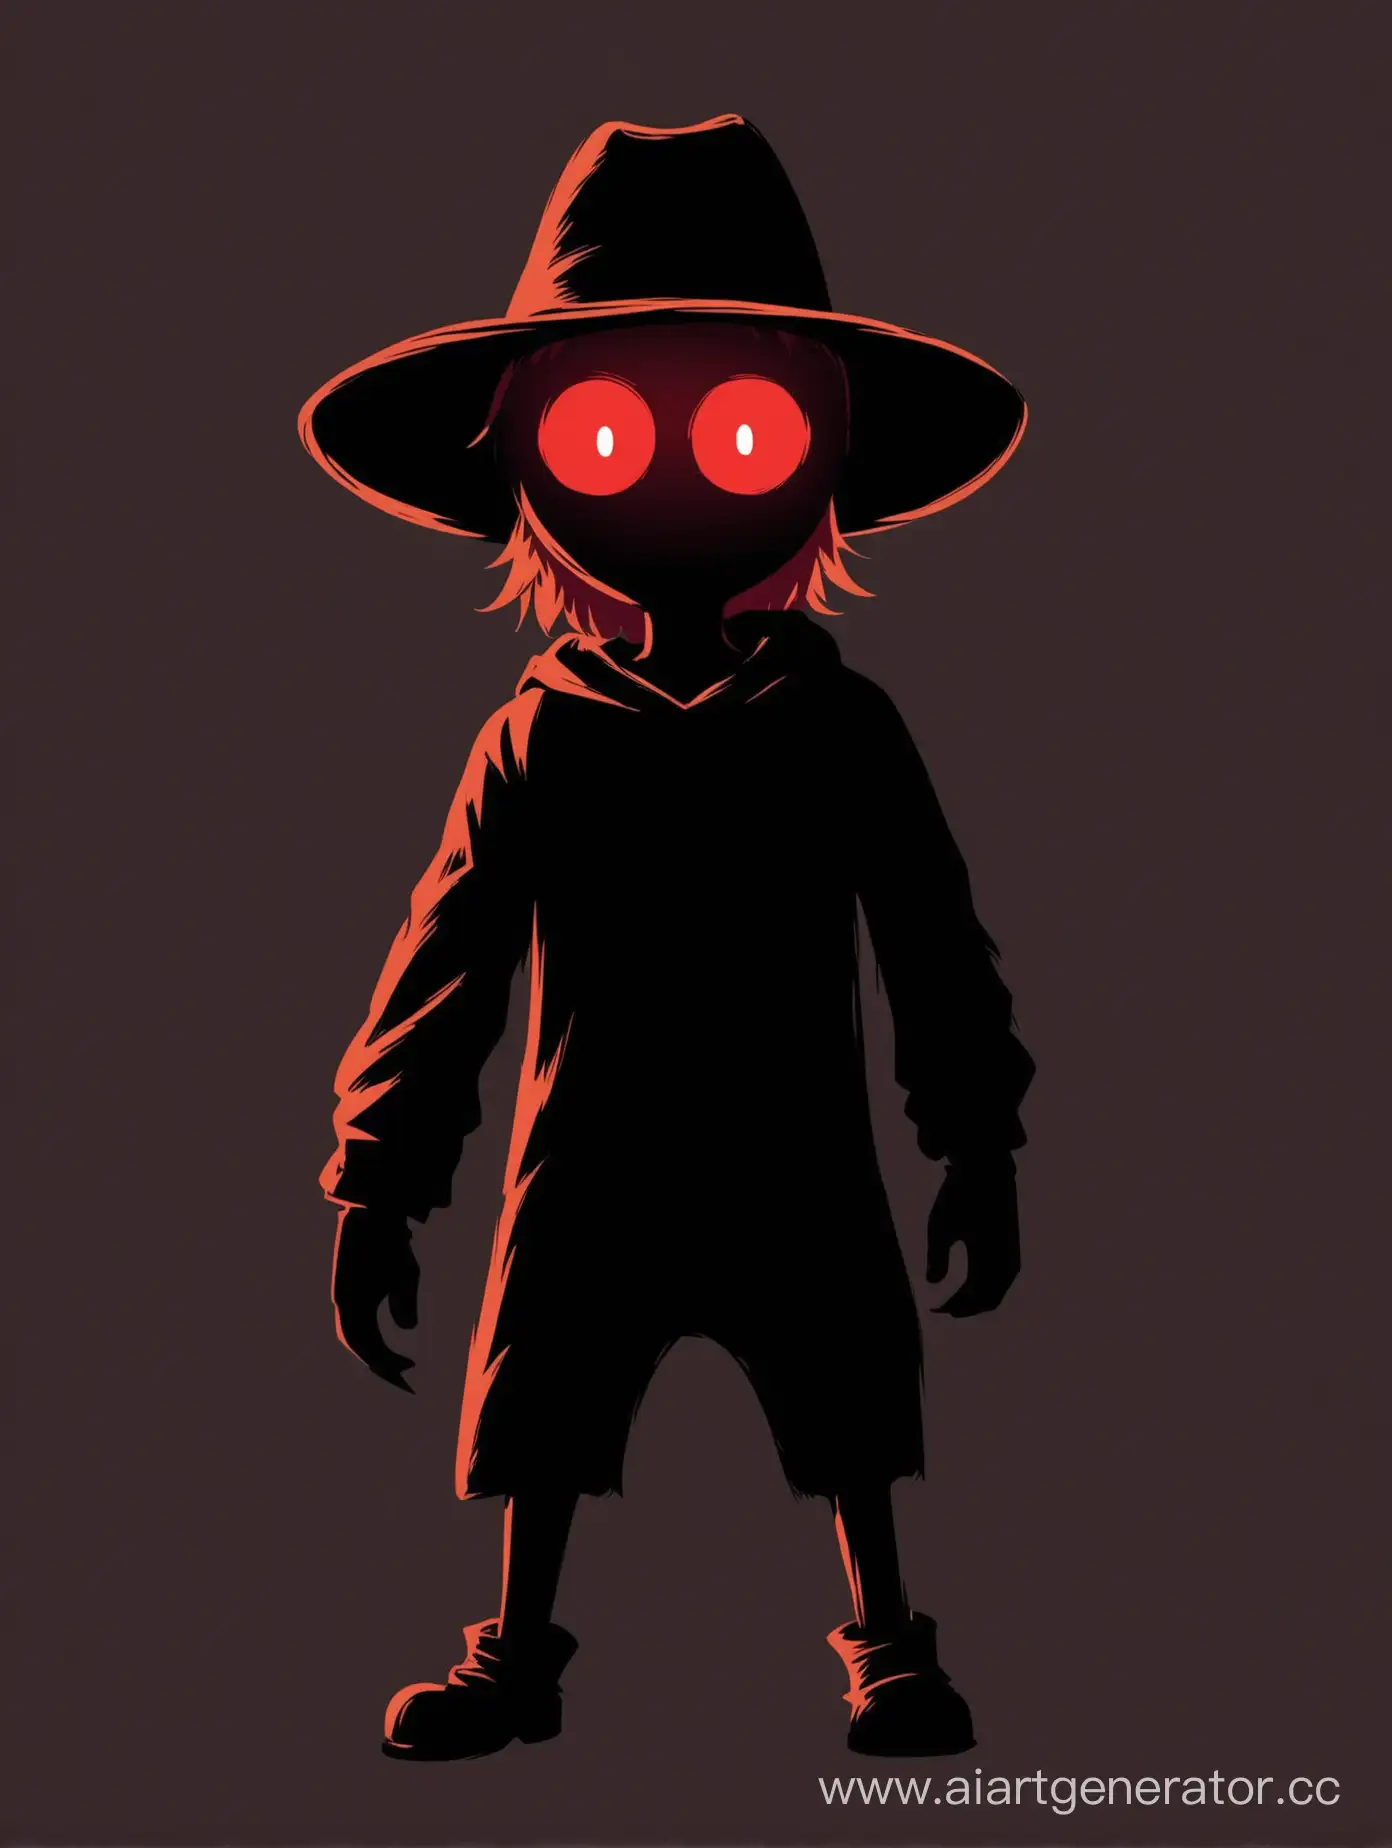 Silhouette-of-a-Hobby-Horse-Rider-in-a-Dark-Hoodie-with-Cowboy-Hat-and-Red-Eyes